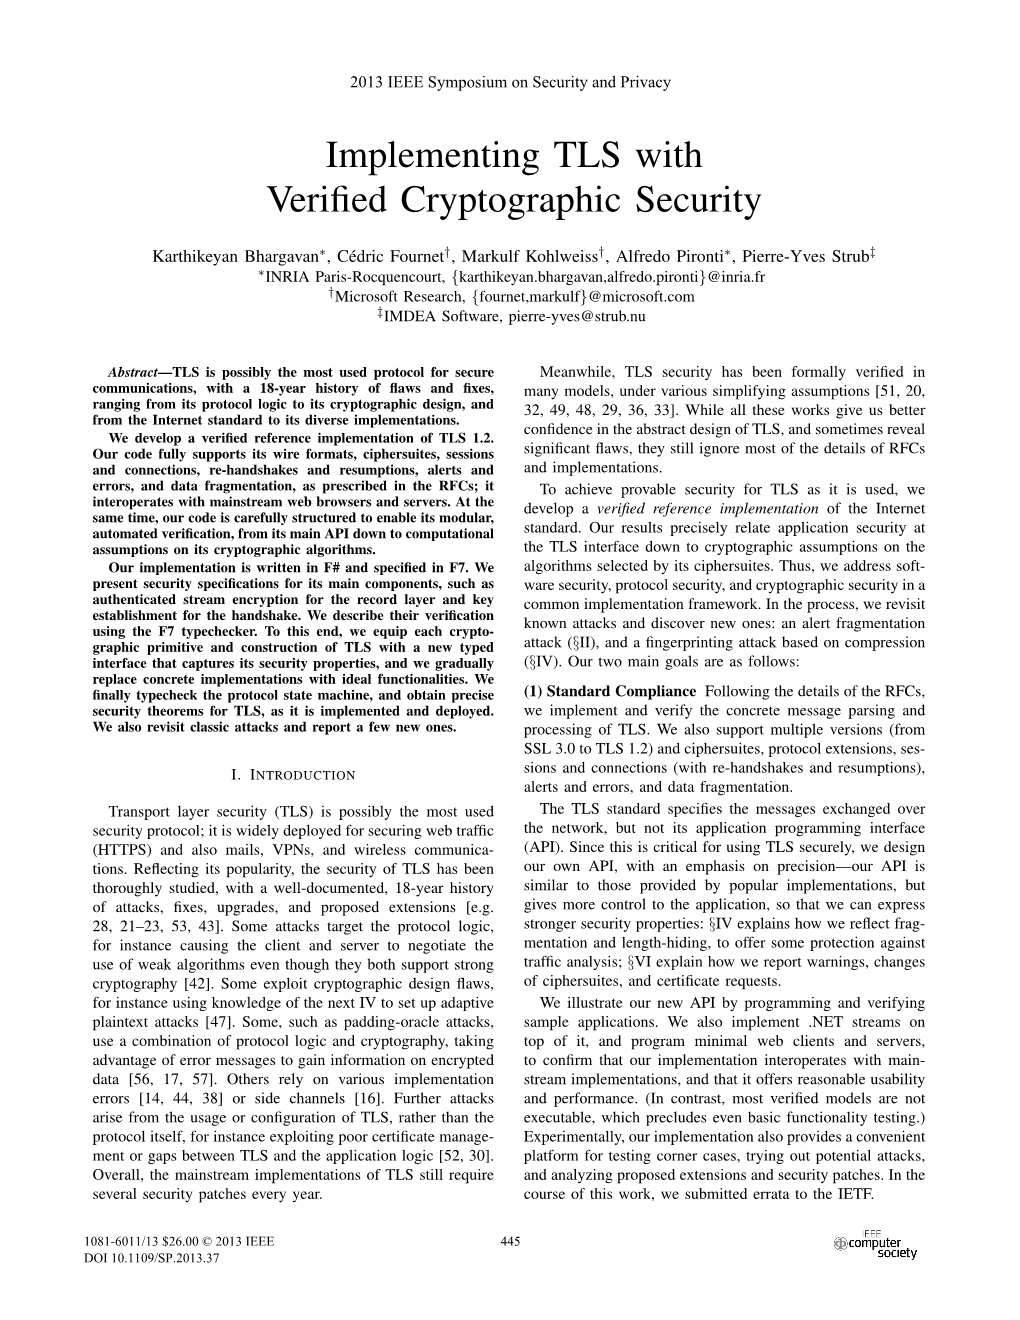 Implementing TLS with Verified Cryptographic Security